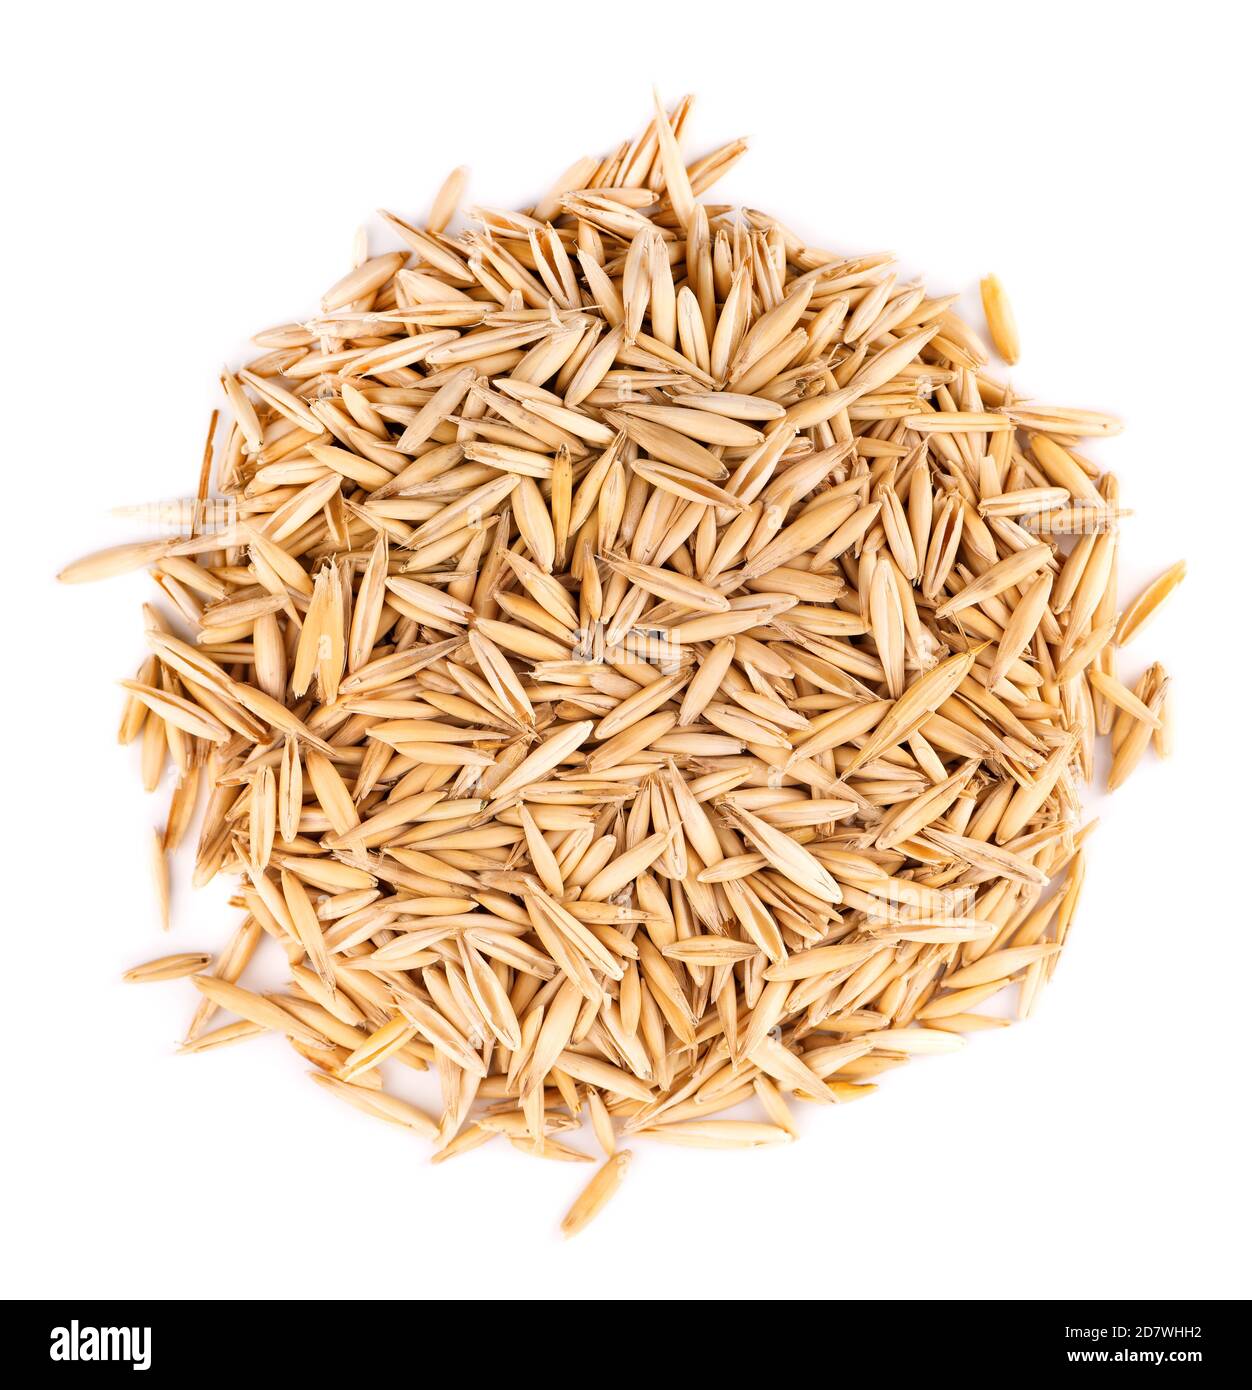 Unpeeled oat grains, isolated on white background. Organic dry oat seeds. Top view. Stock Photo